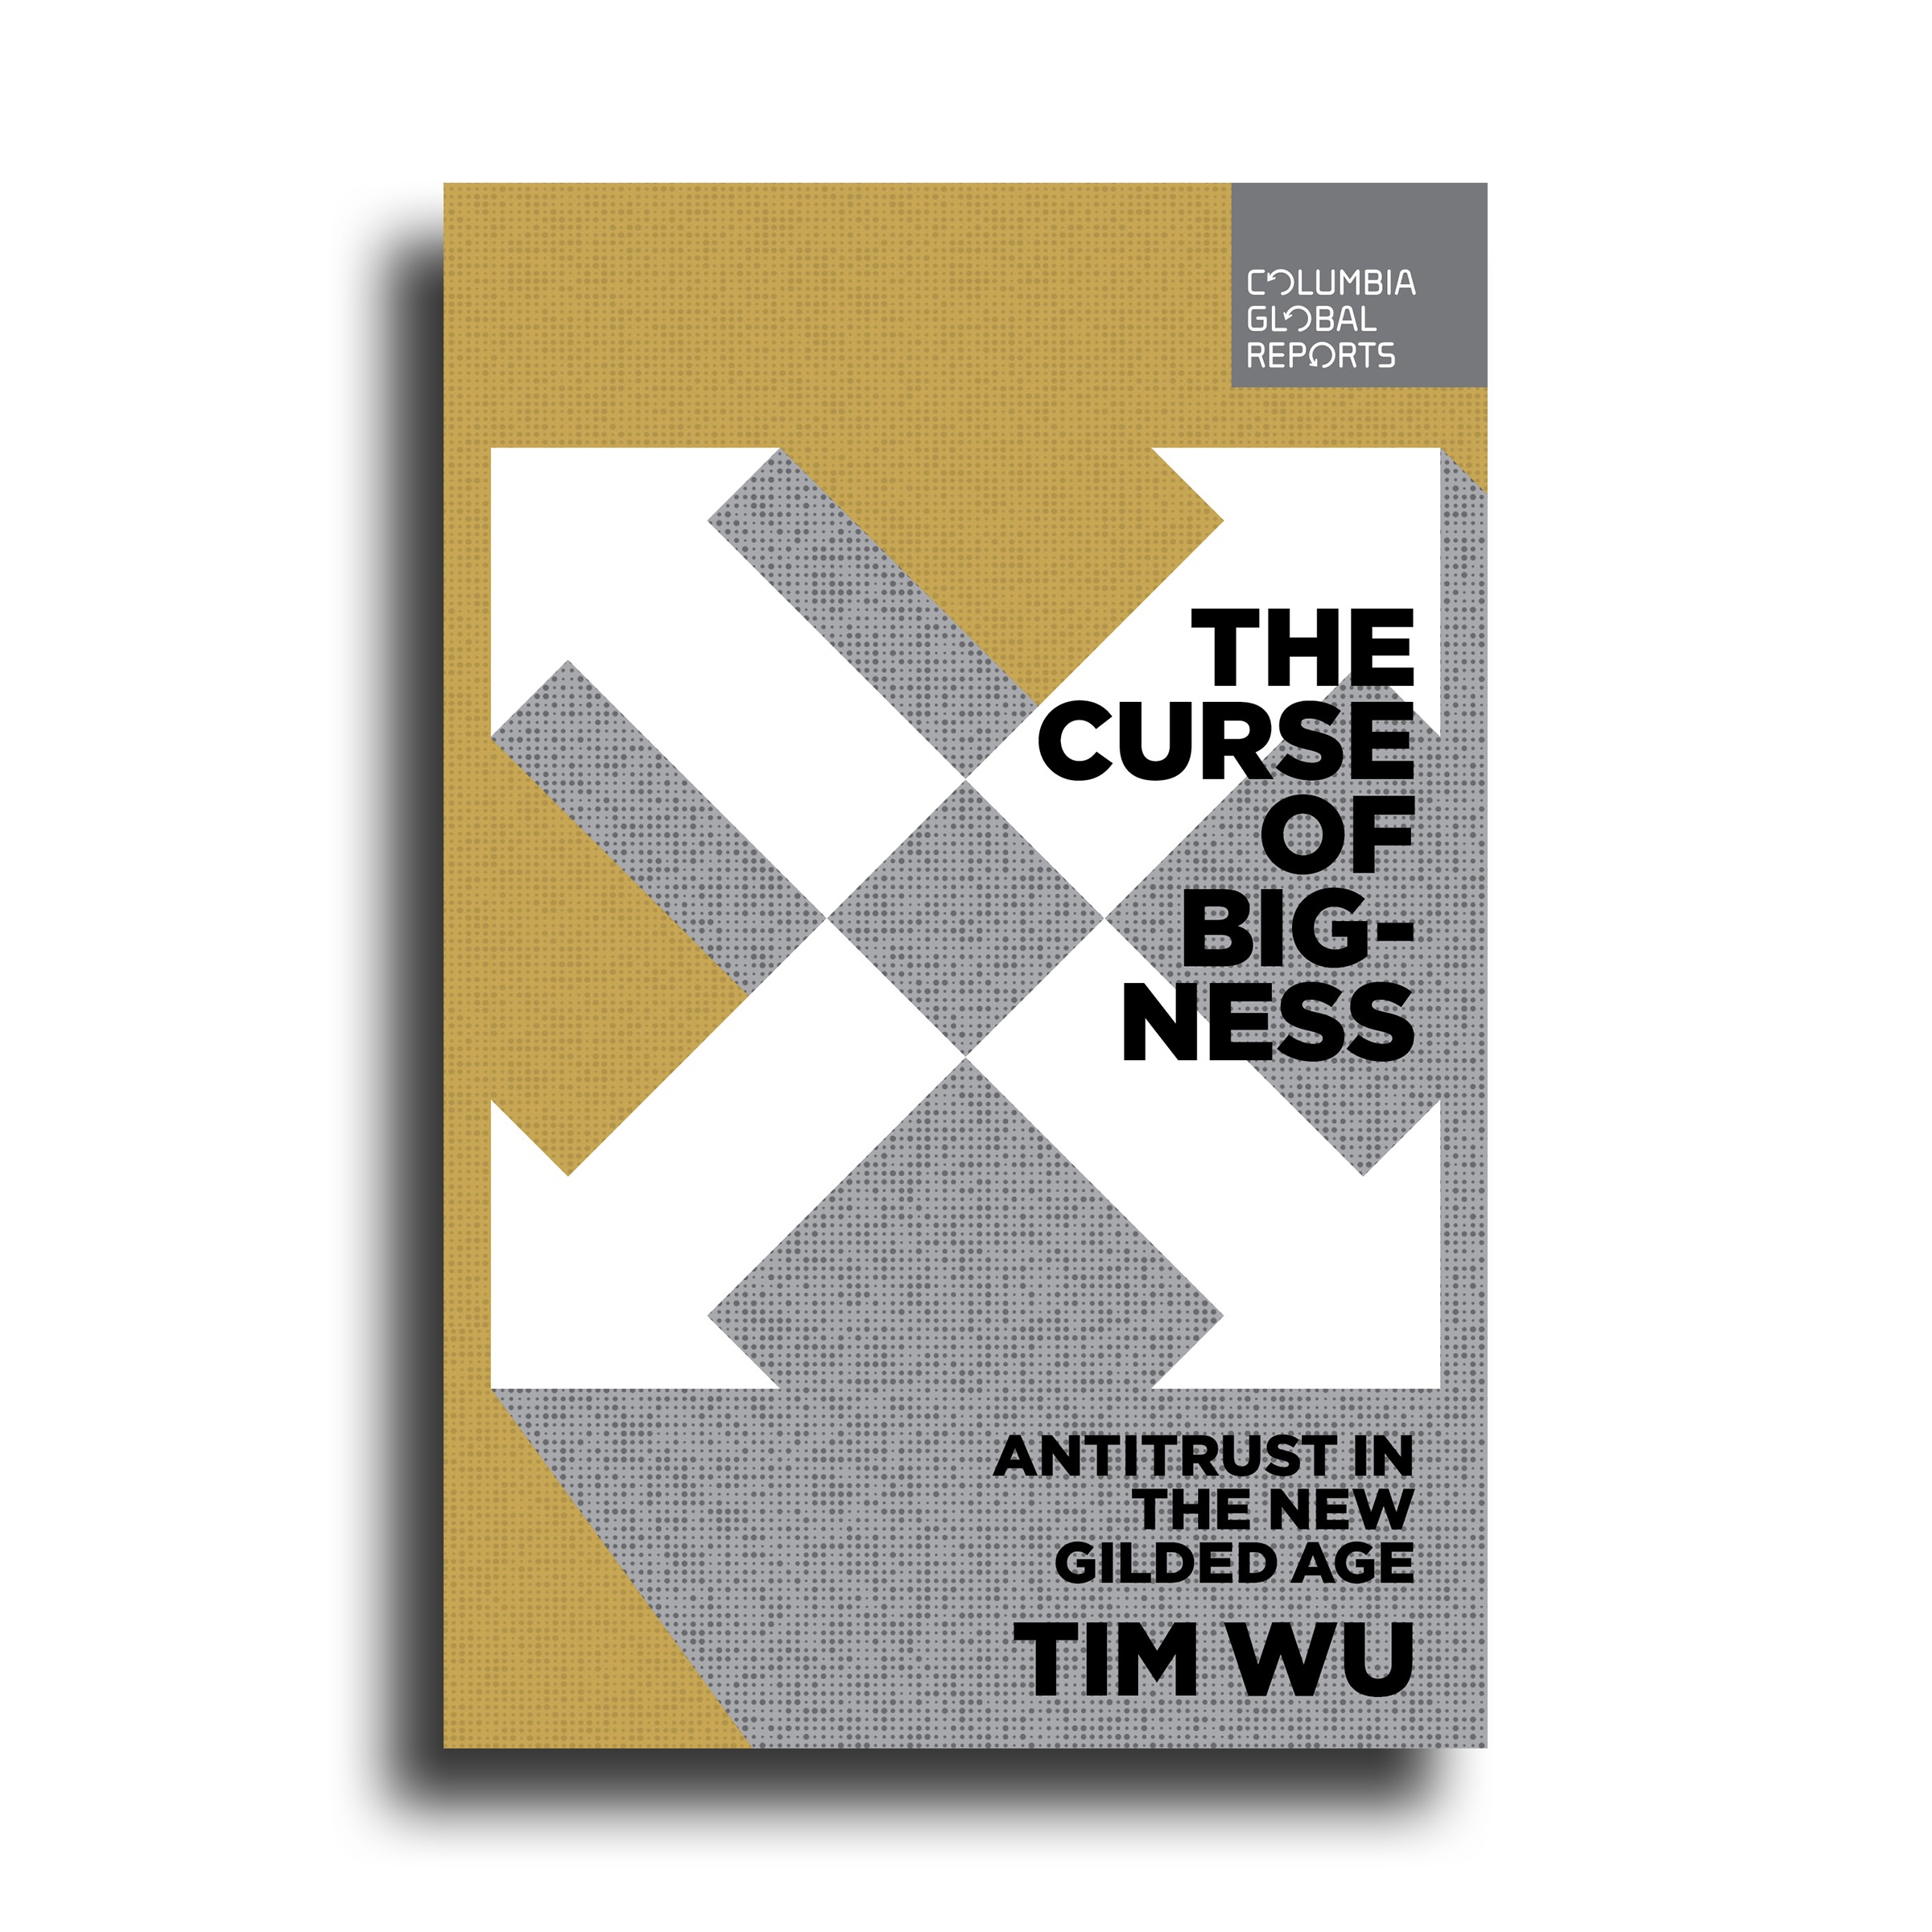 Tim Wu's book-- The Curse of Bigness: Antitrust in the New Gilded Age.